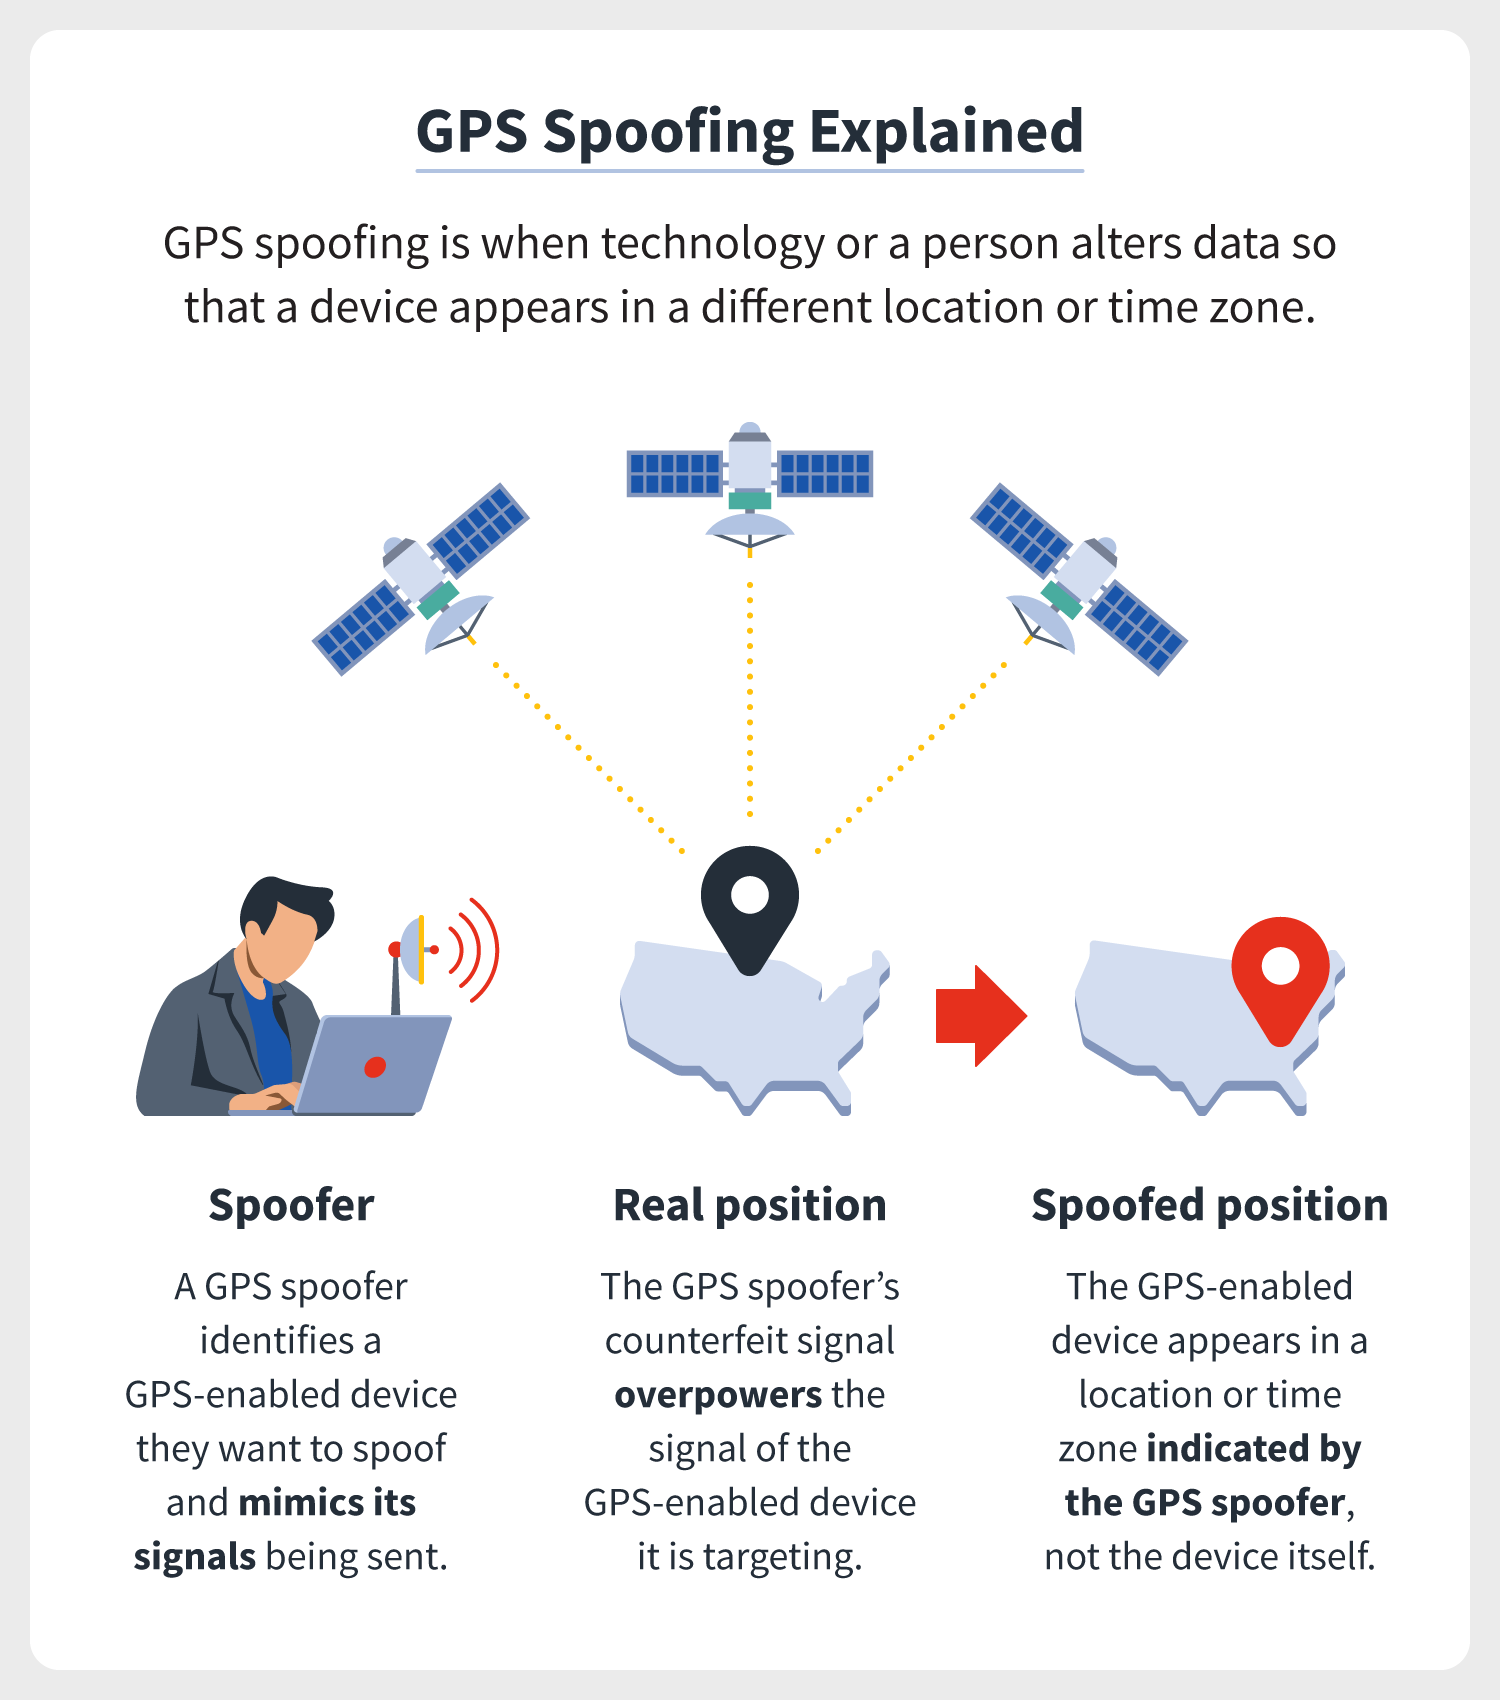 GPS spoofing explained: GPS spoofing is when technology or a person alters data so that a device appears in a different location or time zone. 